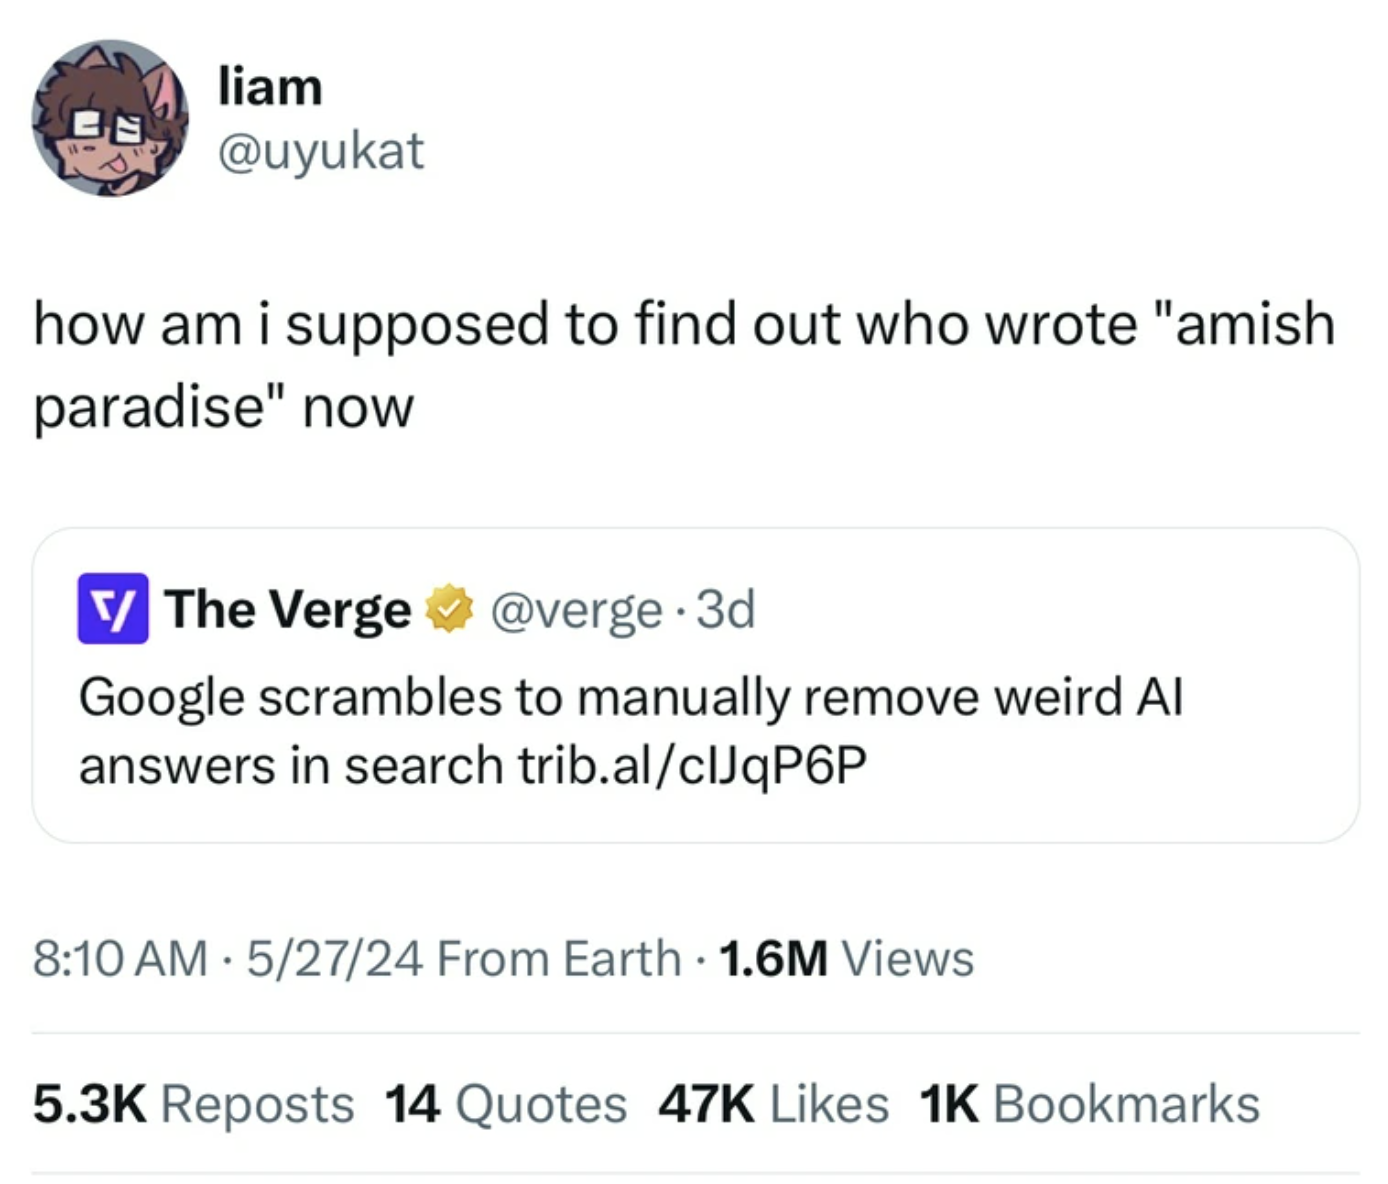 screenshot - liam how am i supposed to find out who wrote "amish paradise" now V The Verge 3d Google scrambles to manually remove weird Al answers in search trib.alclJqP6P 52724 From Earth 1.6M Views Reposts 14 Quotes 47K 1K Bookmarks